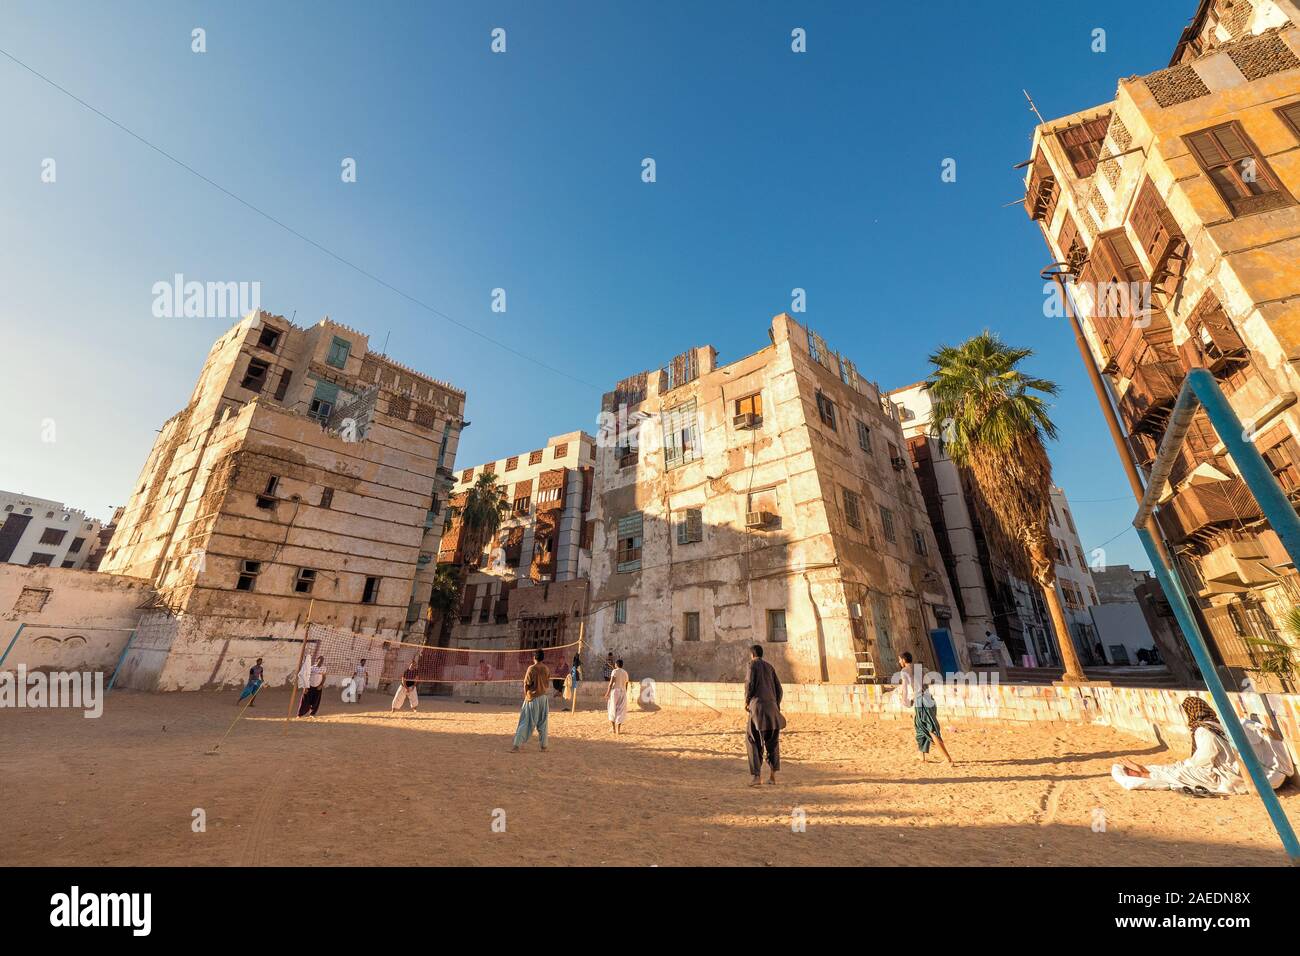 Arabic men playing beach volleyball on a grungy sports field in a residential area at the historic district Al Balad in Jeddah, Saudi Arabia, KSA Stock Photo